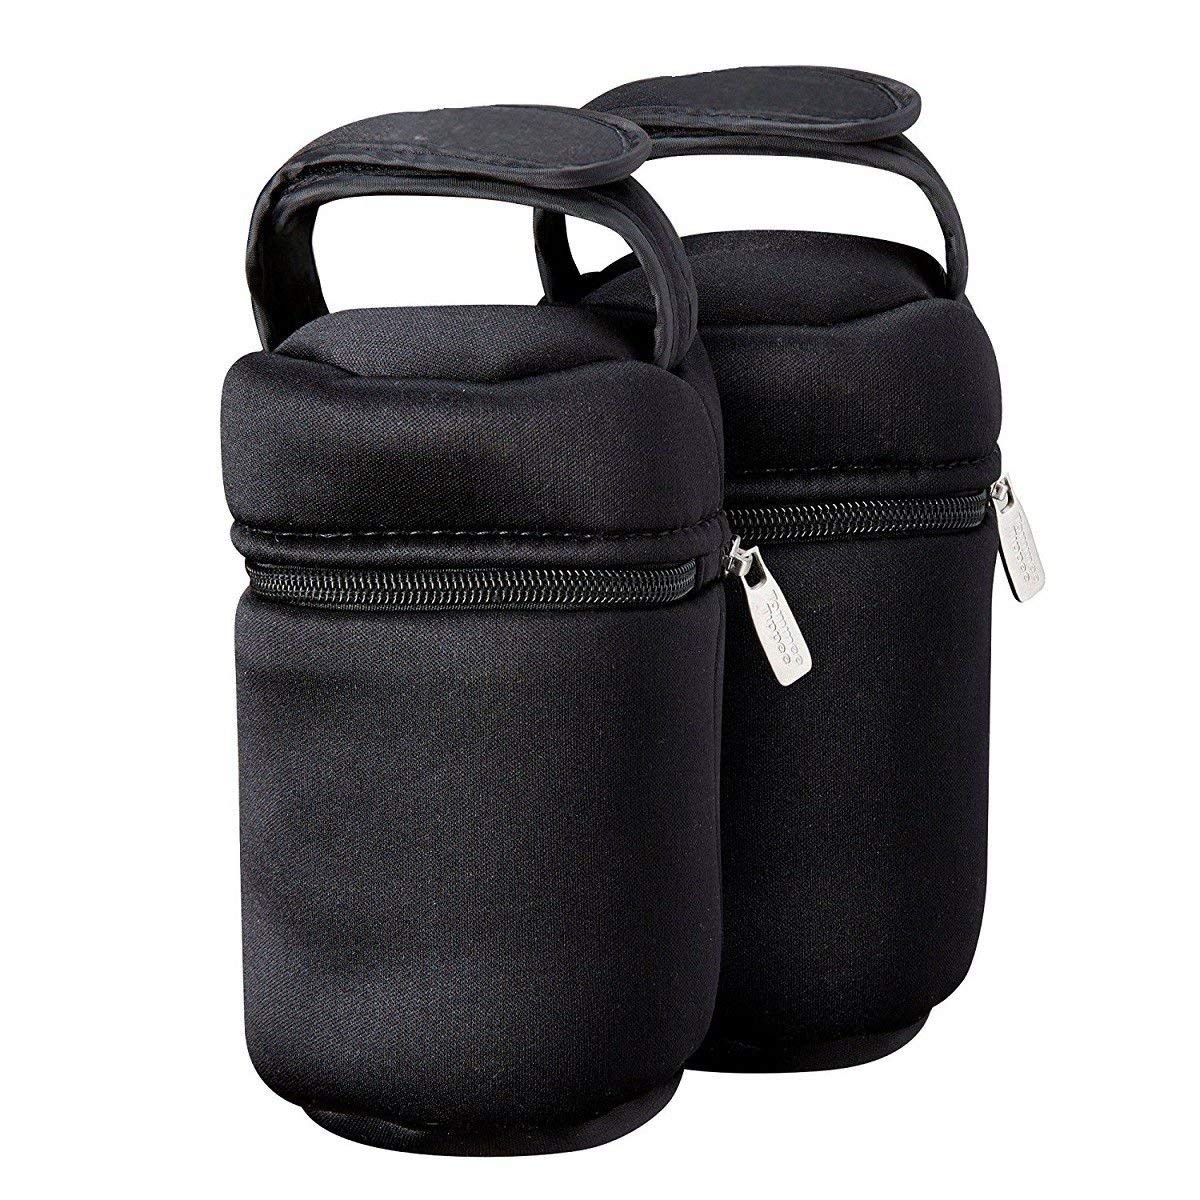 Tommee Tippee Closer to Nature Insulated Bottle Carriers (2-Pack) [Baby Product]